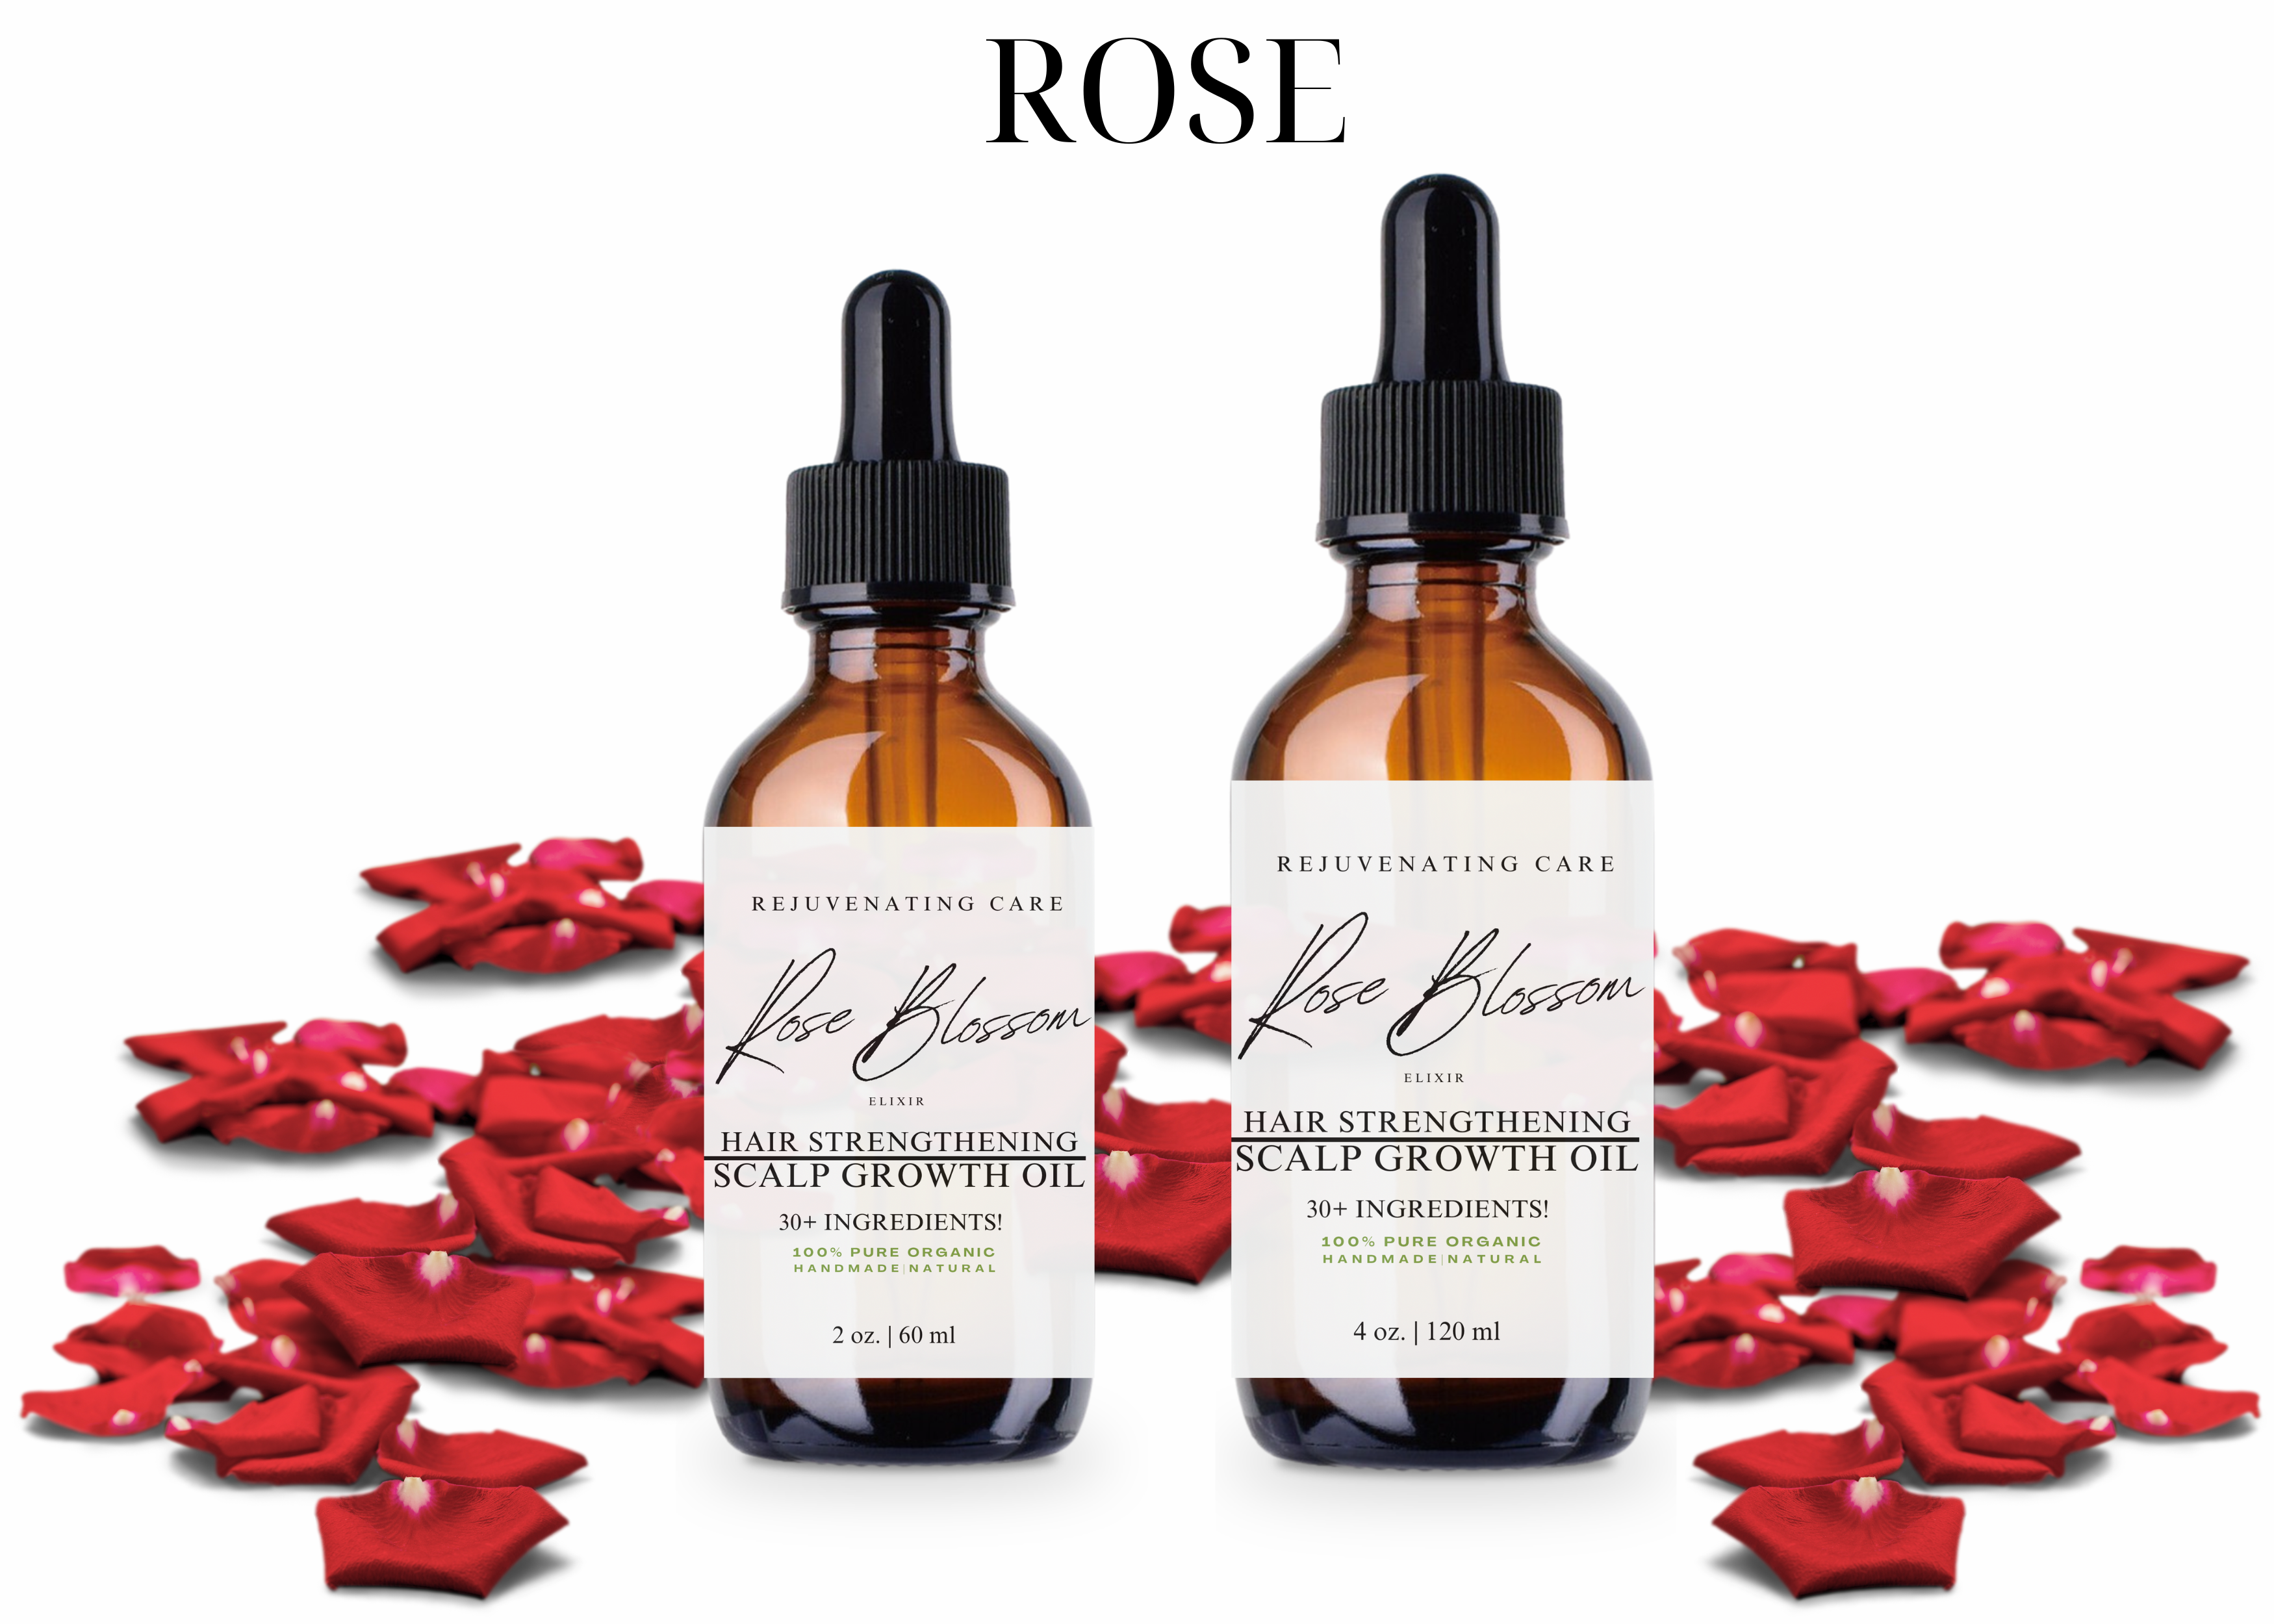 Rose Hair Strengthening and Scalp Growth Oil 4oz